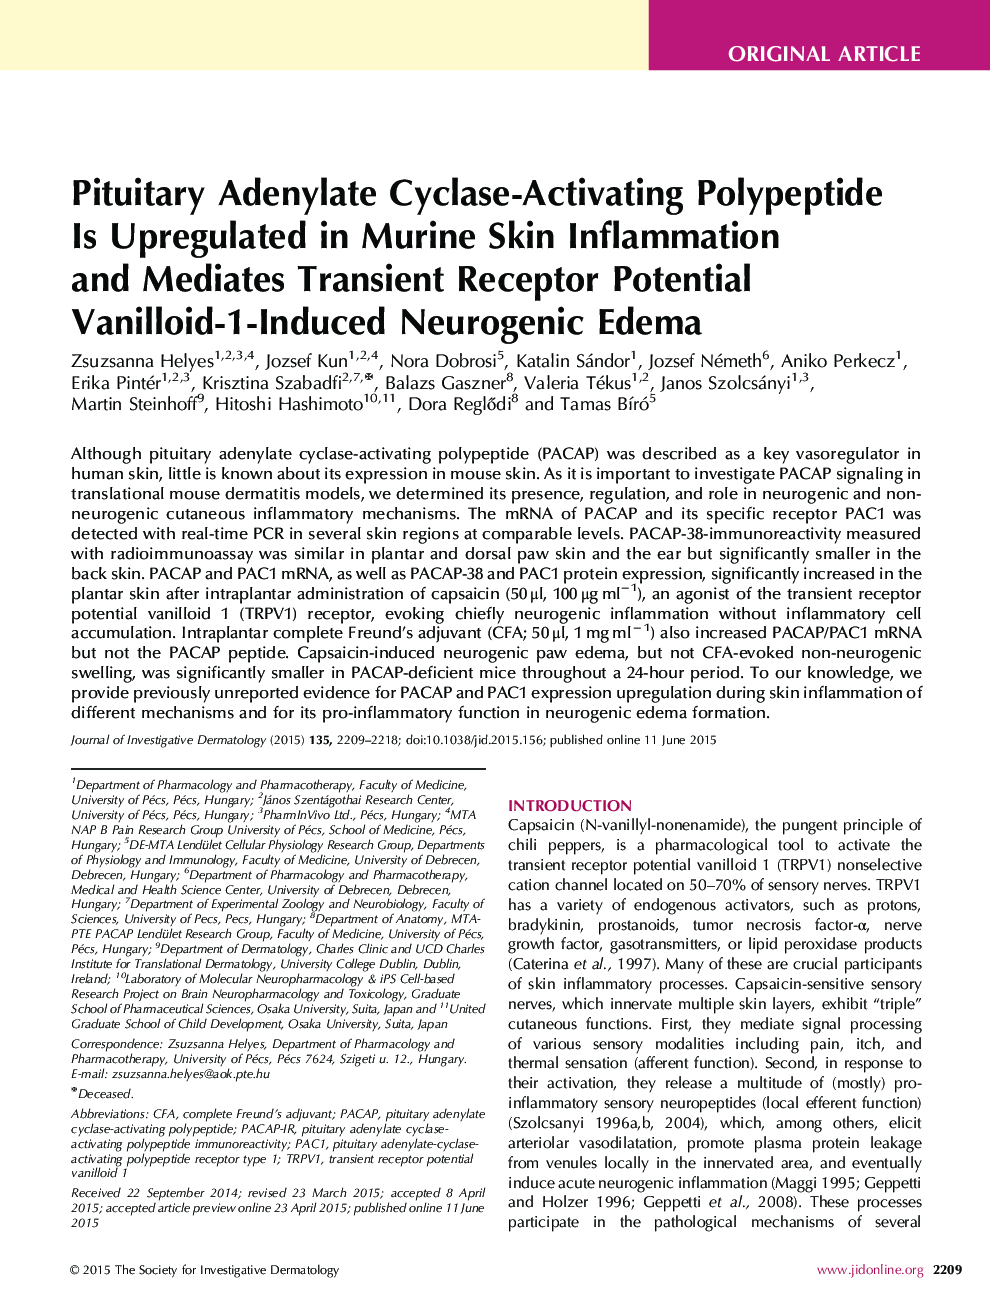 Pituitary Adenylate Cyclase-Activating Polypeptide Is Upregulated in Murine Skin Inflammation and Mediates Transient Receptor Potential Vanilloid-1-Induced Neurogenic Edema 